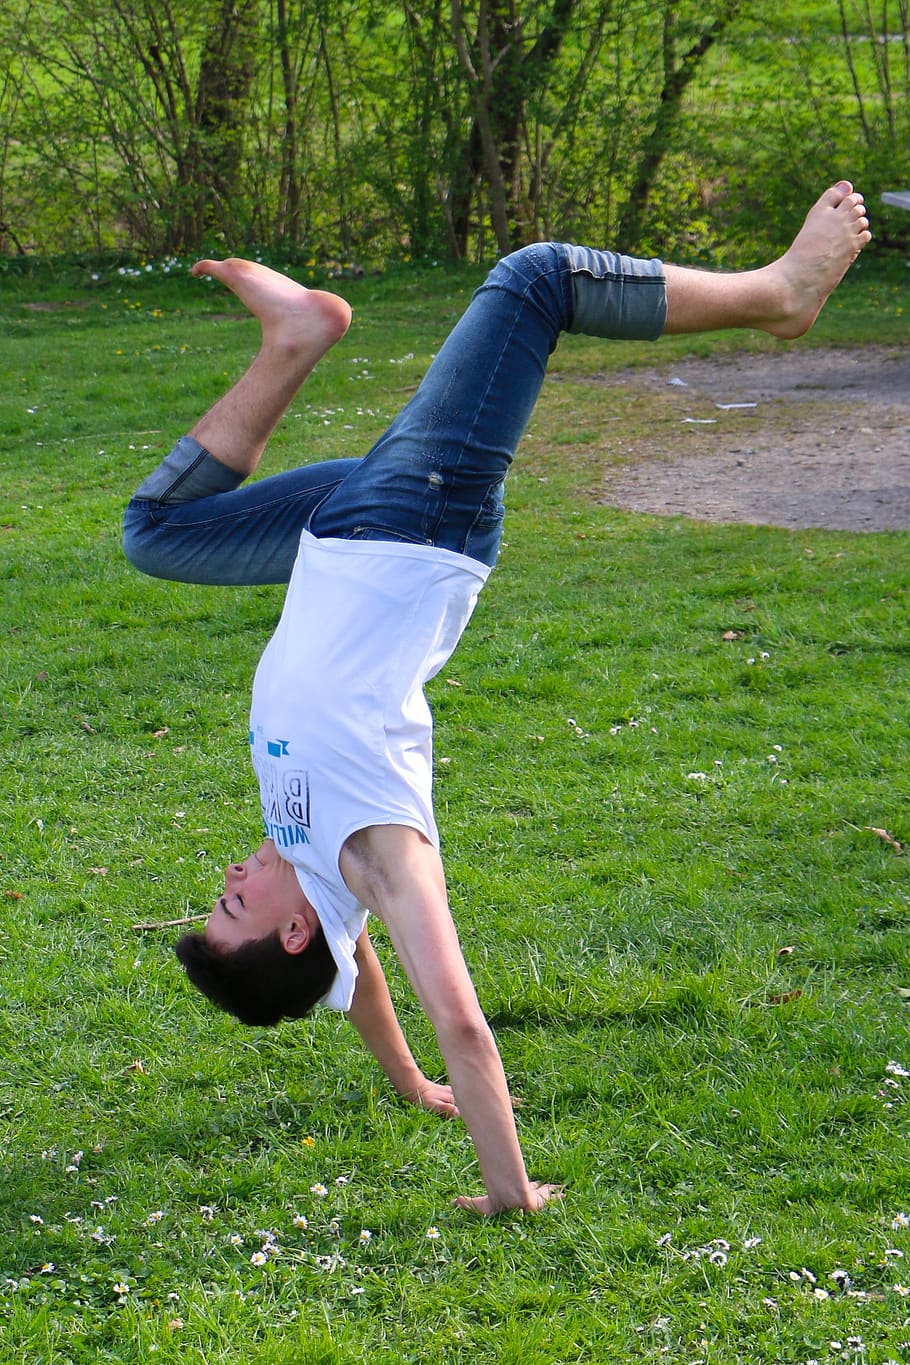 meadow, acrobatics, boy, young people, upside down, dynamic, plant, full length, one person, grass